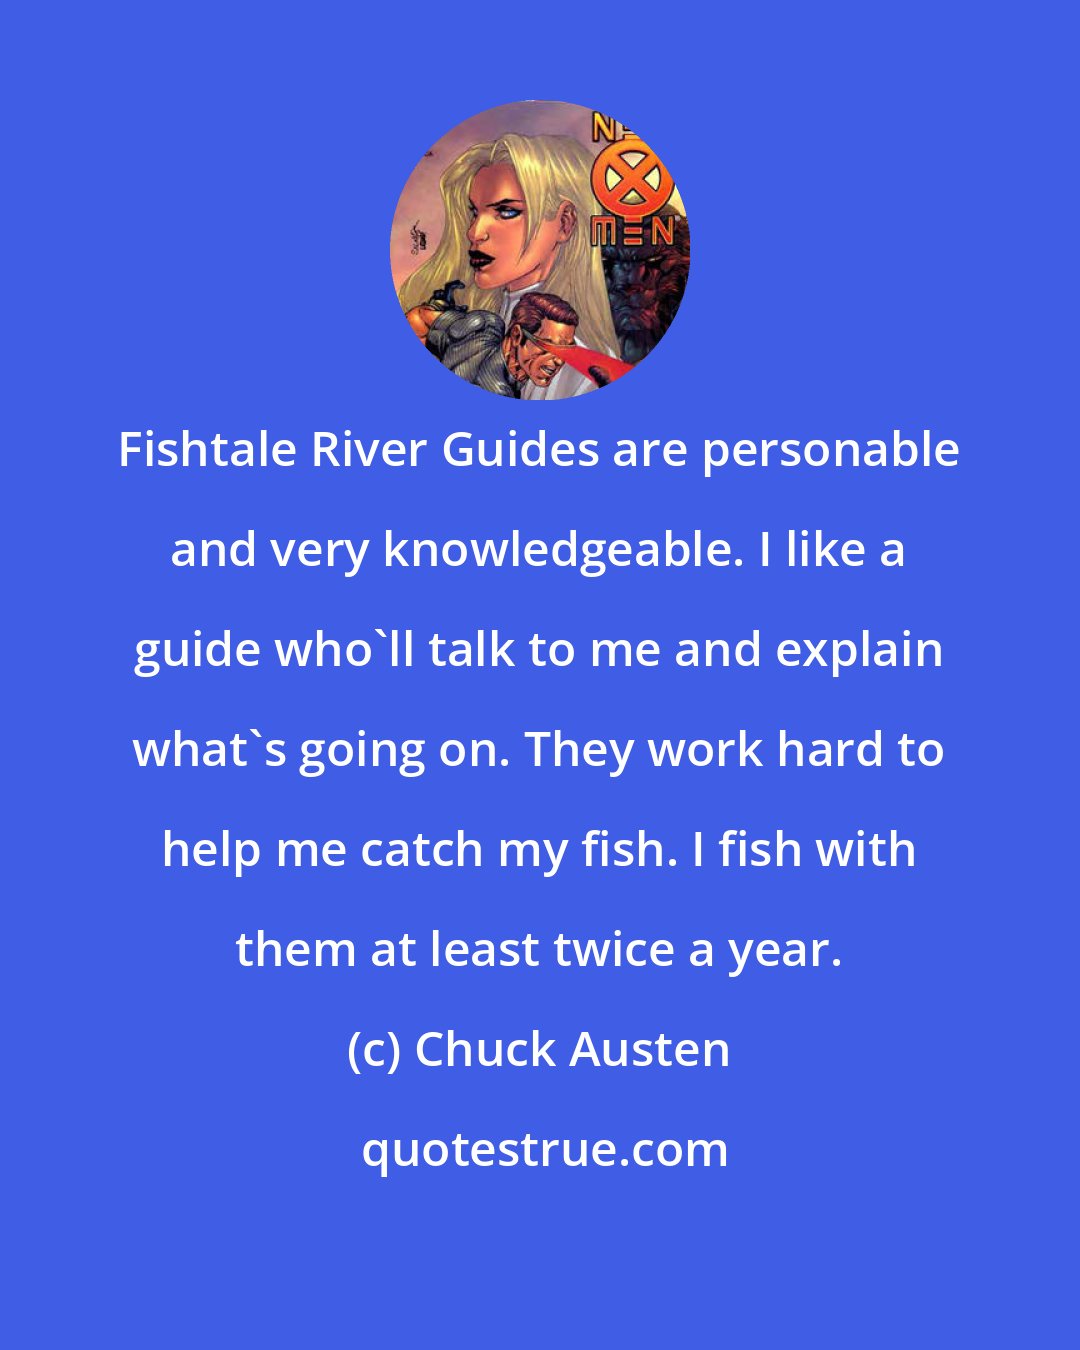 Chuck Austen: Fishtale River Guides are personable and very knowledgeable. I like a guide who'll talk to me and explain what's going on. They work hard to help me catch my fish. I fish with them at least twice a year.